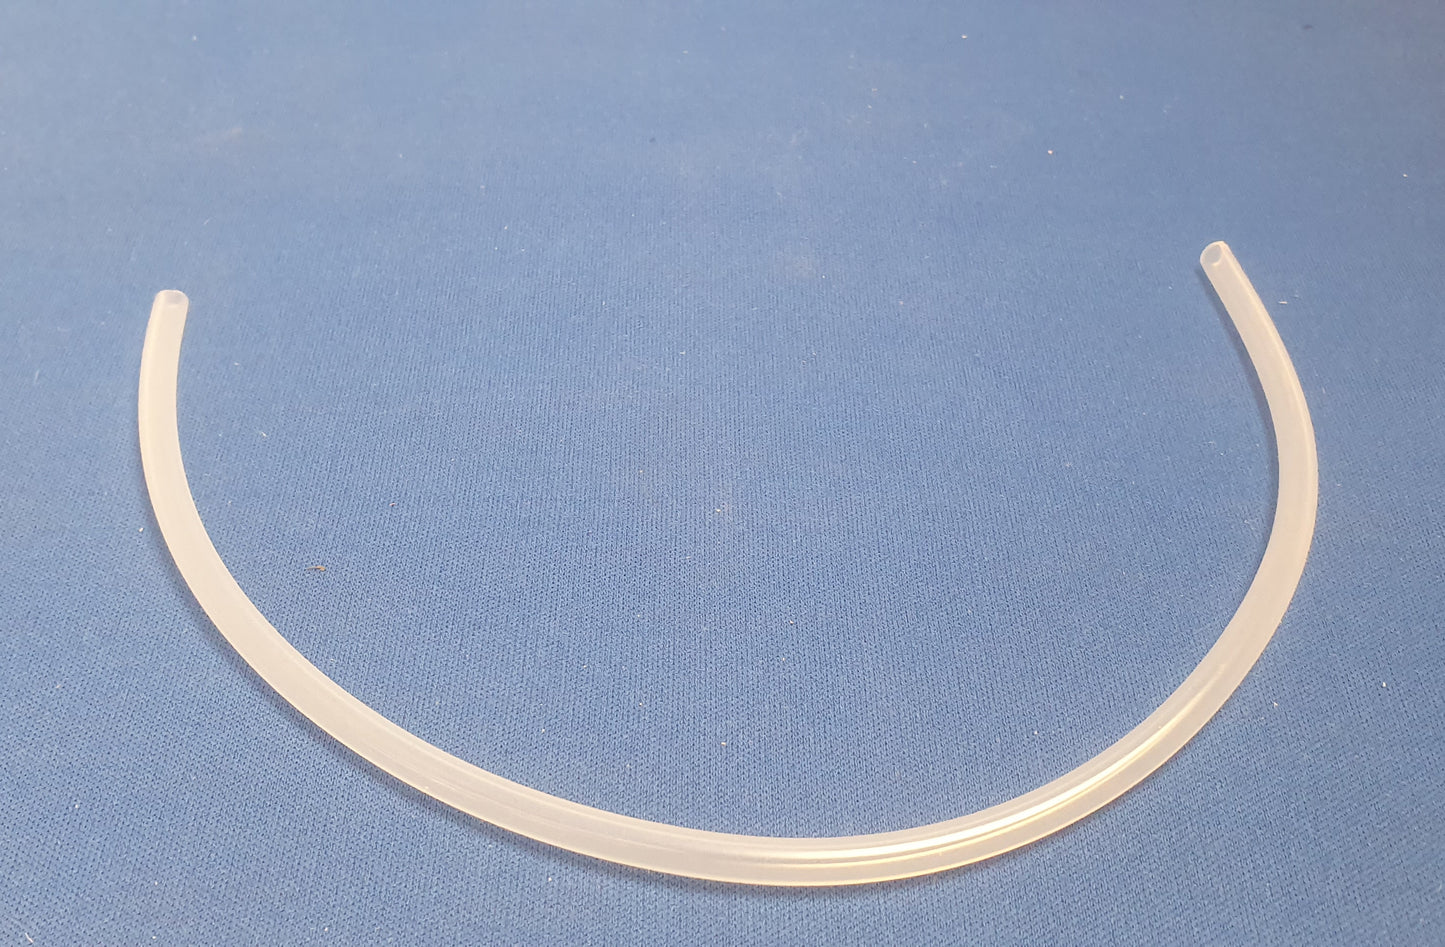 Silicon tube 5mm od x 3mm id x 12" long. ST1